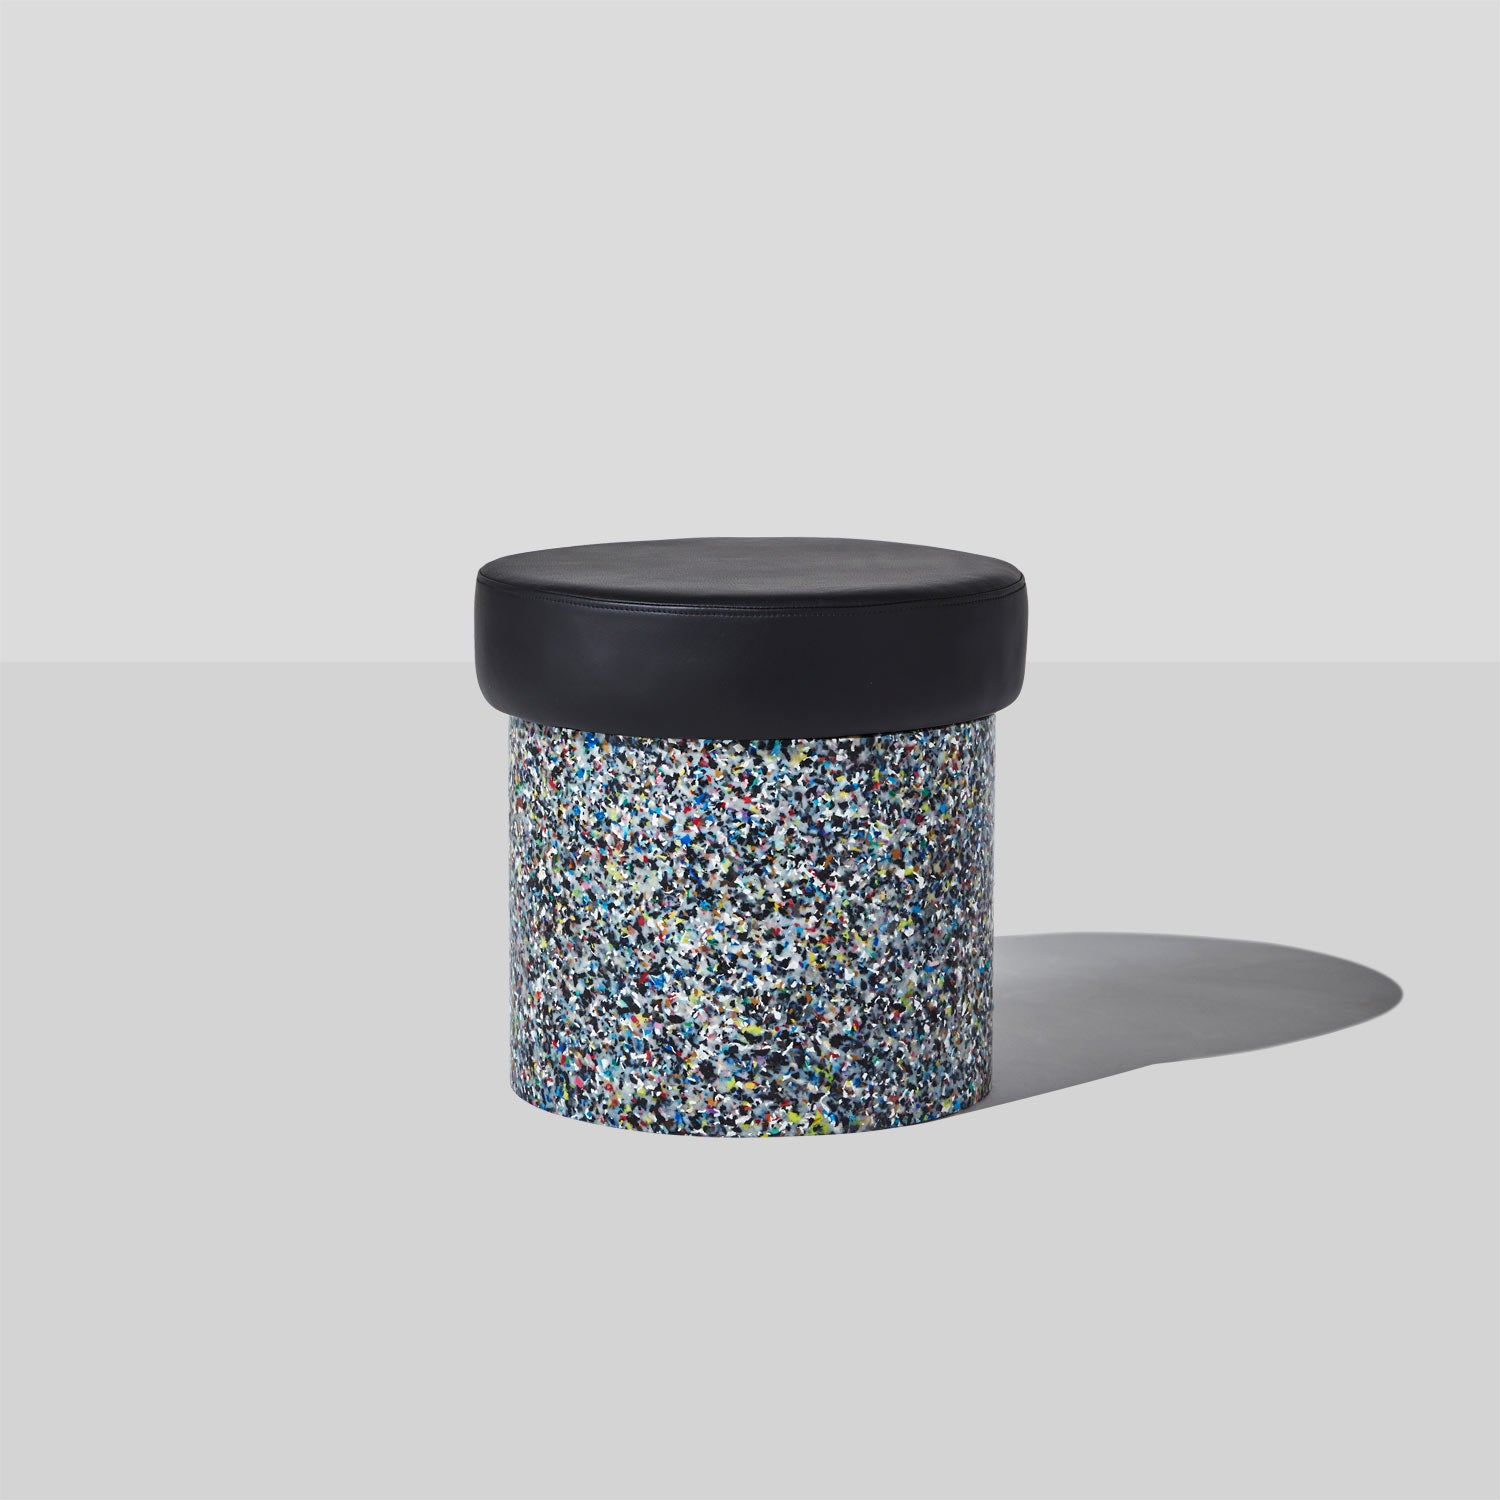 Confetti Ottoman | 100% Recycled Plastic Indoor/Outdoor Furniture | DesignByThem | GibsonKarlo ** HL1 Leather Primary - BA90 Black